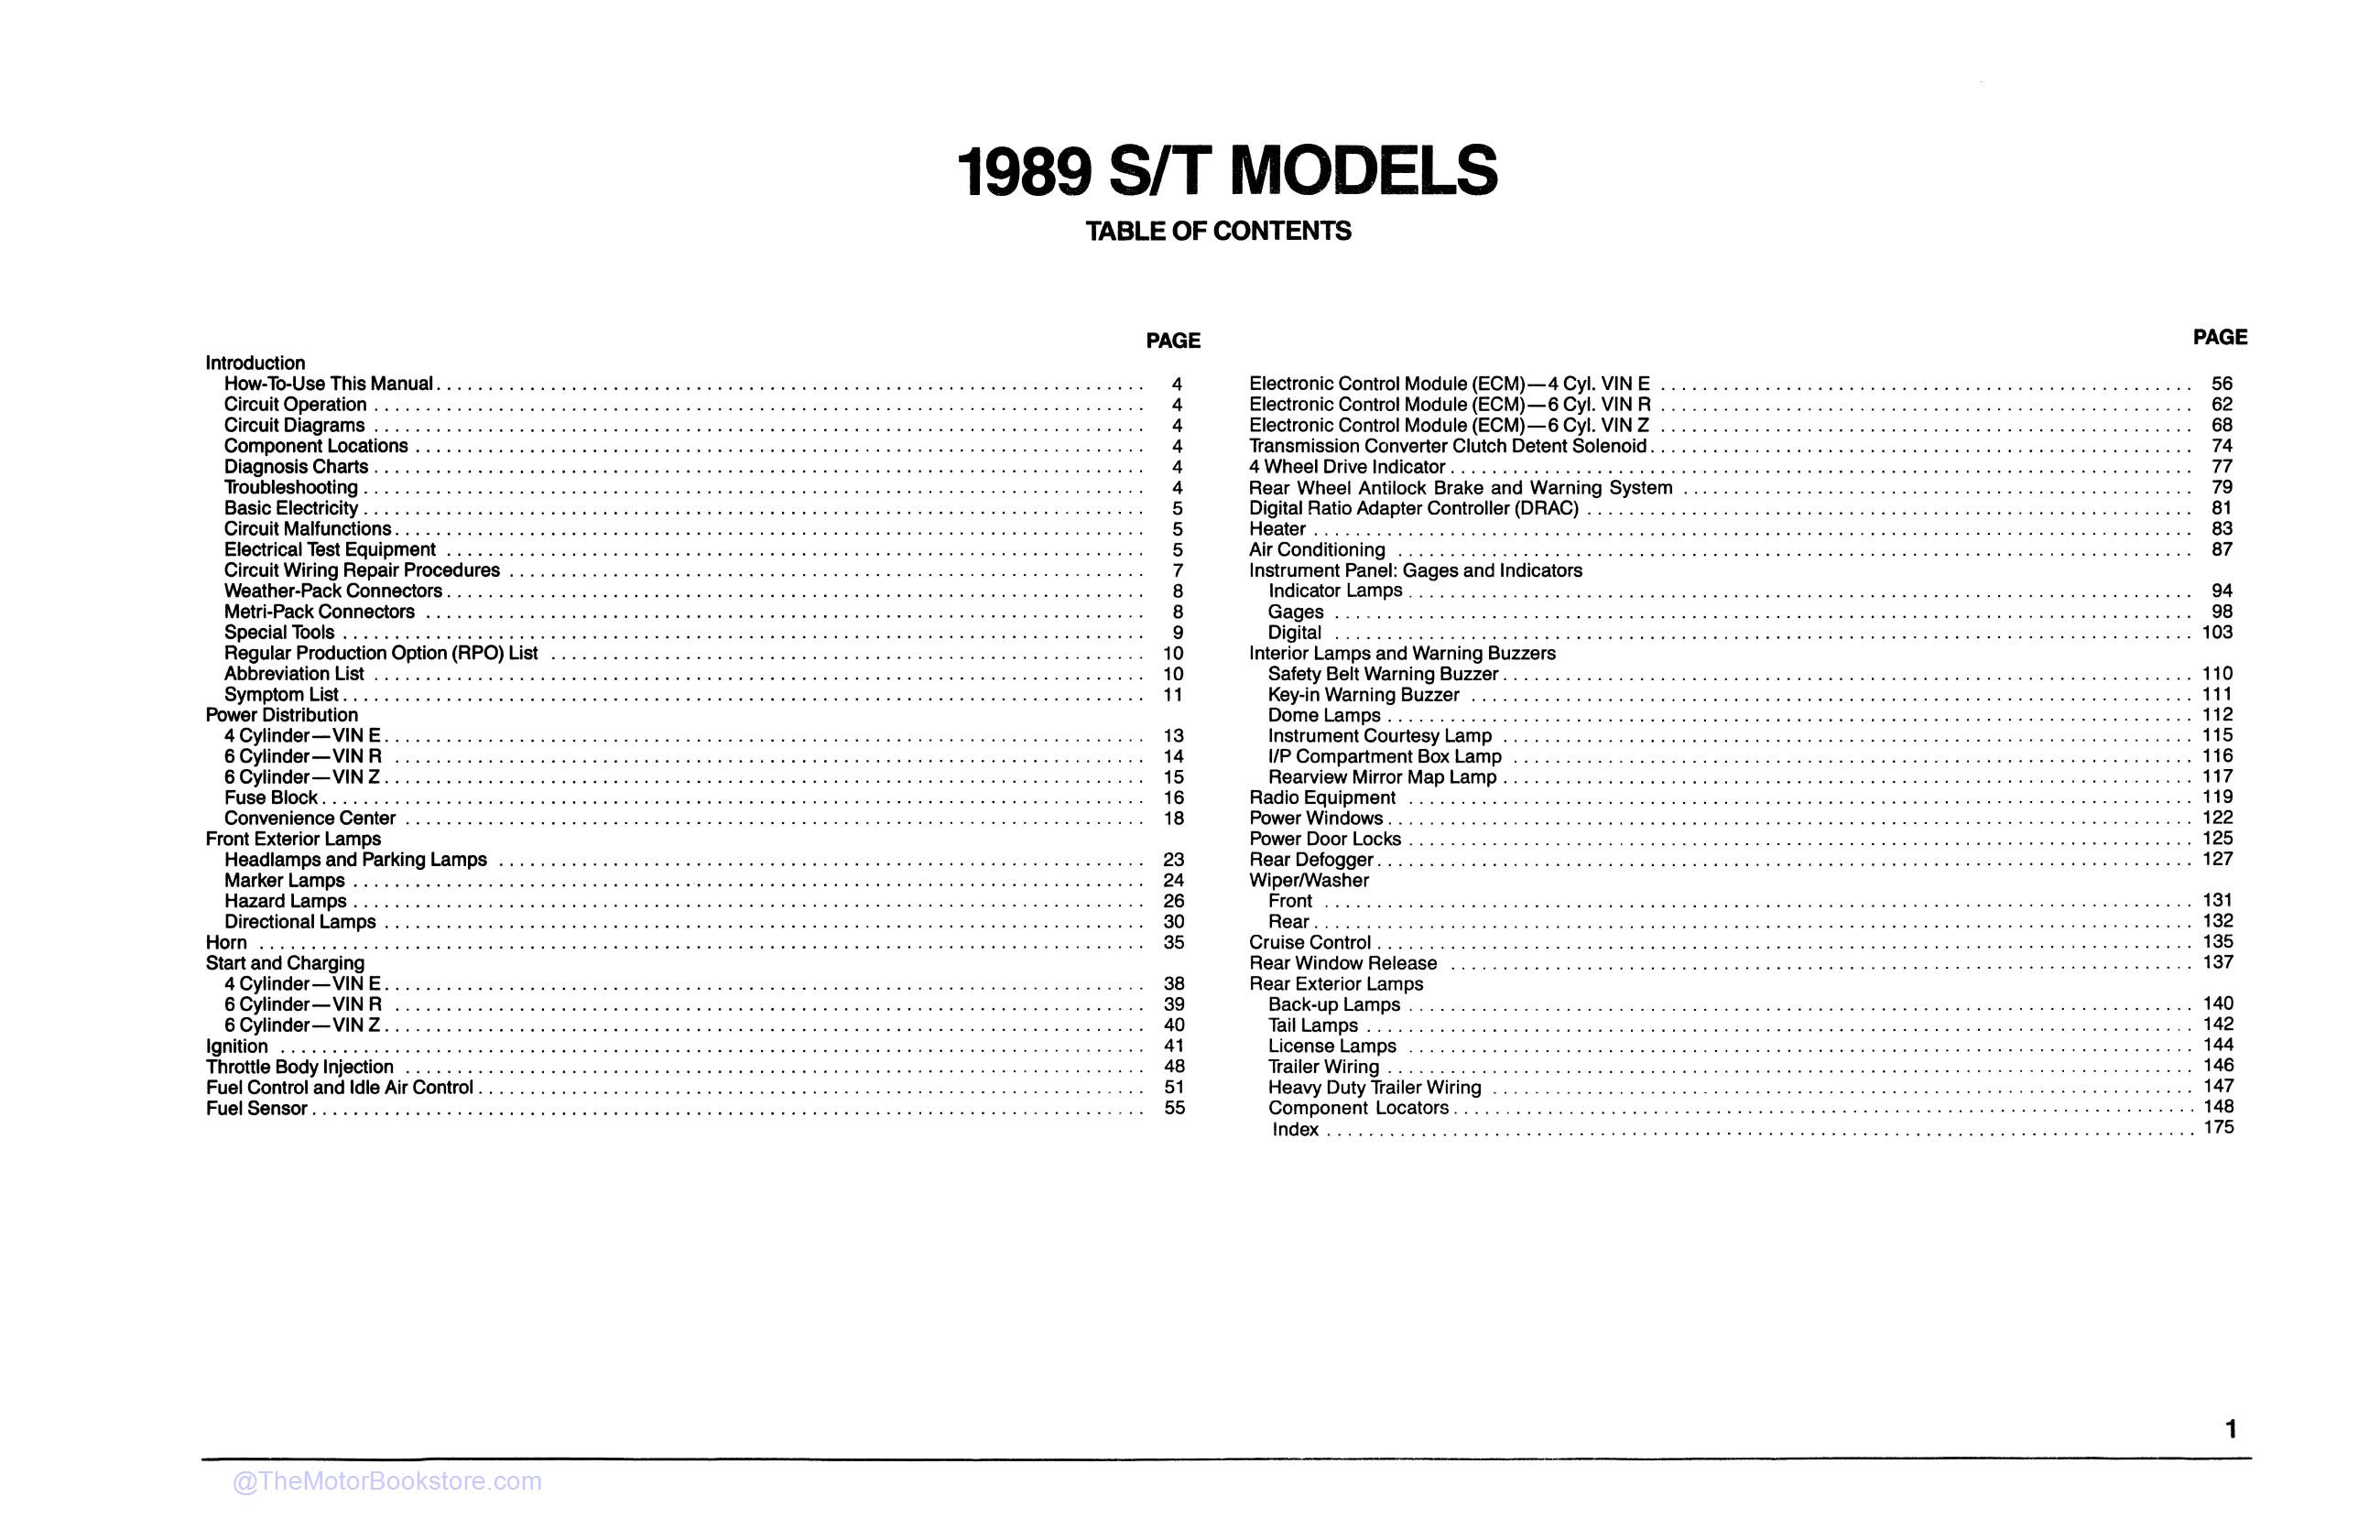 1989 Chevrolet S-10 Truck Electrical Diagnosis & Wiring Diagrams  - Table of Contents